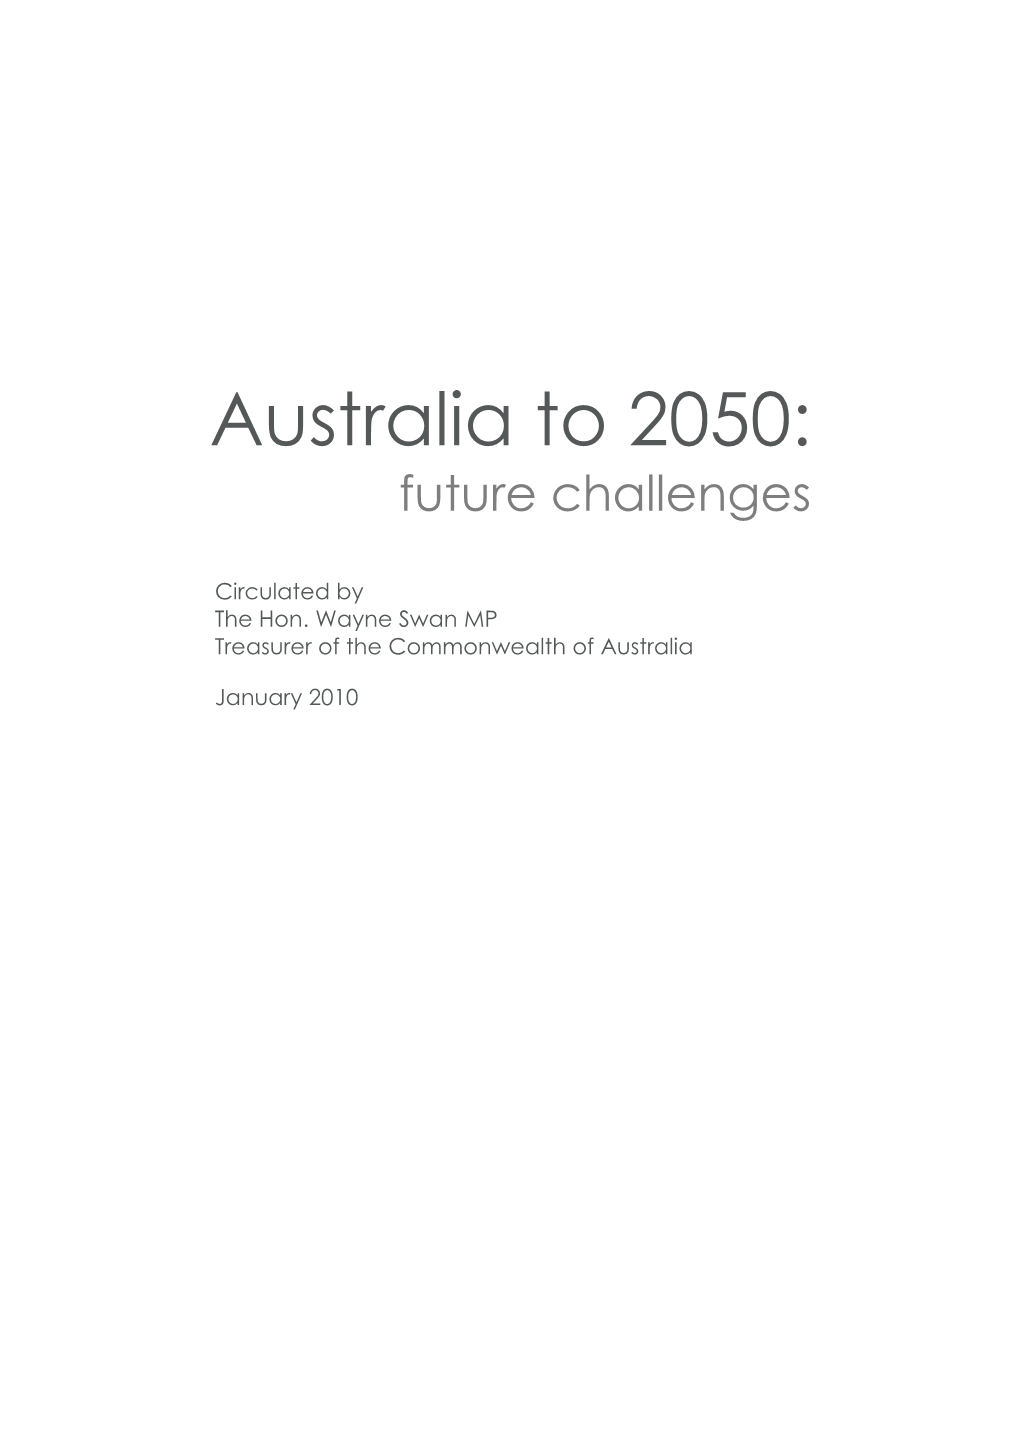 Intergenerational Report 2010 Provides a Comprehensive Analysis of the Challenges That Australia Will Face Over the Next Forty Years